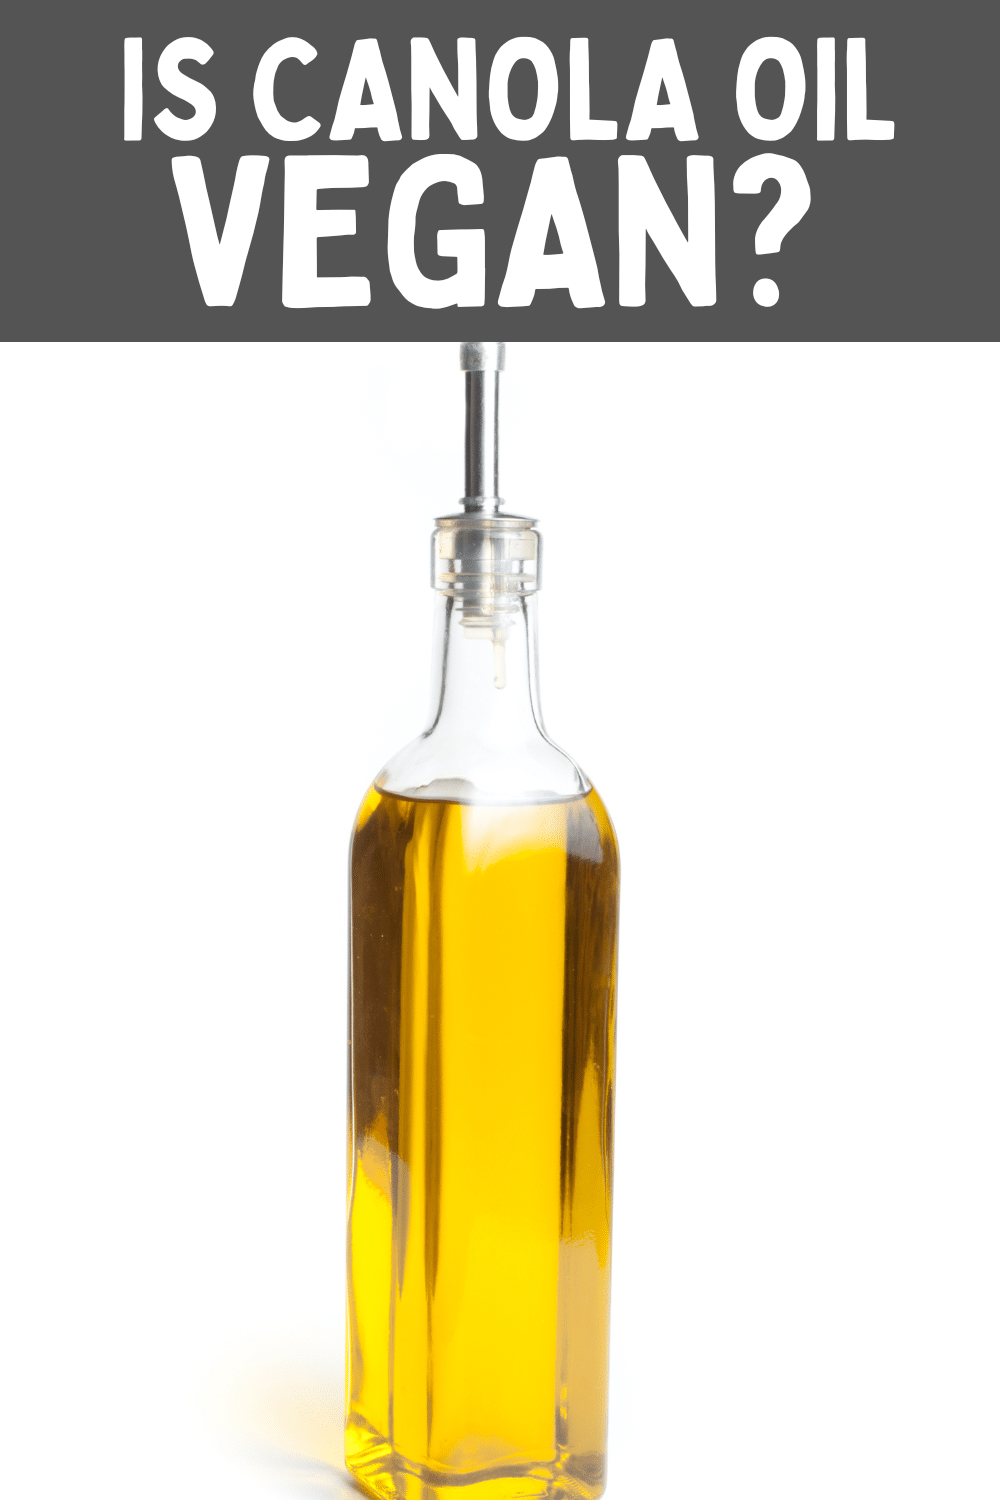 glass bottle with yellow liquid and text overlay: is canola oil vegan?